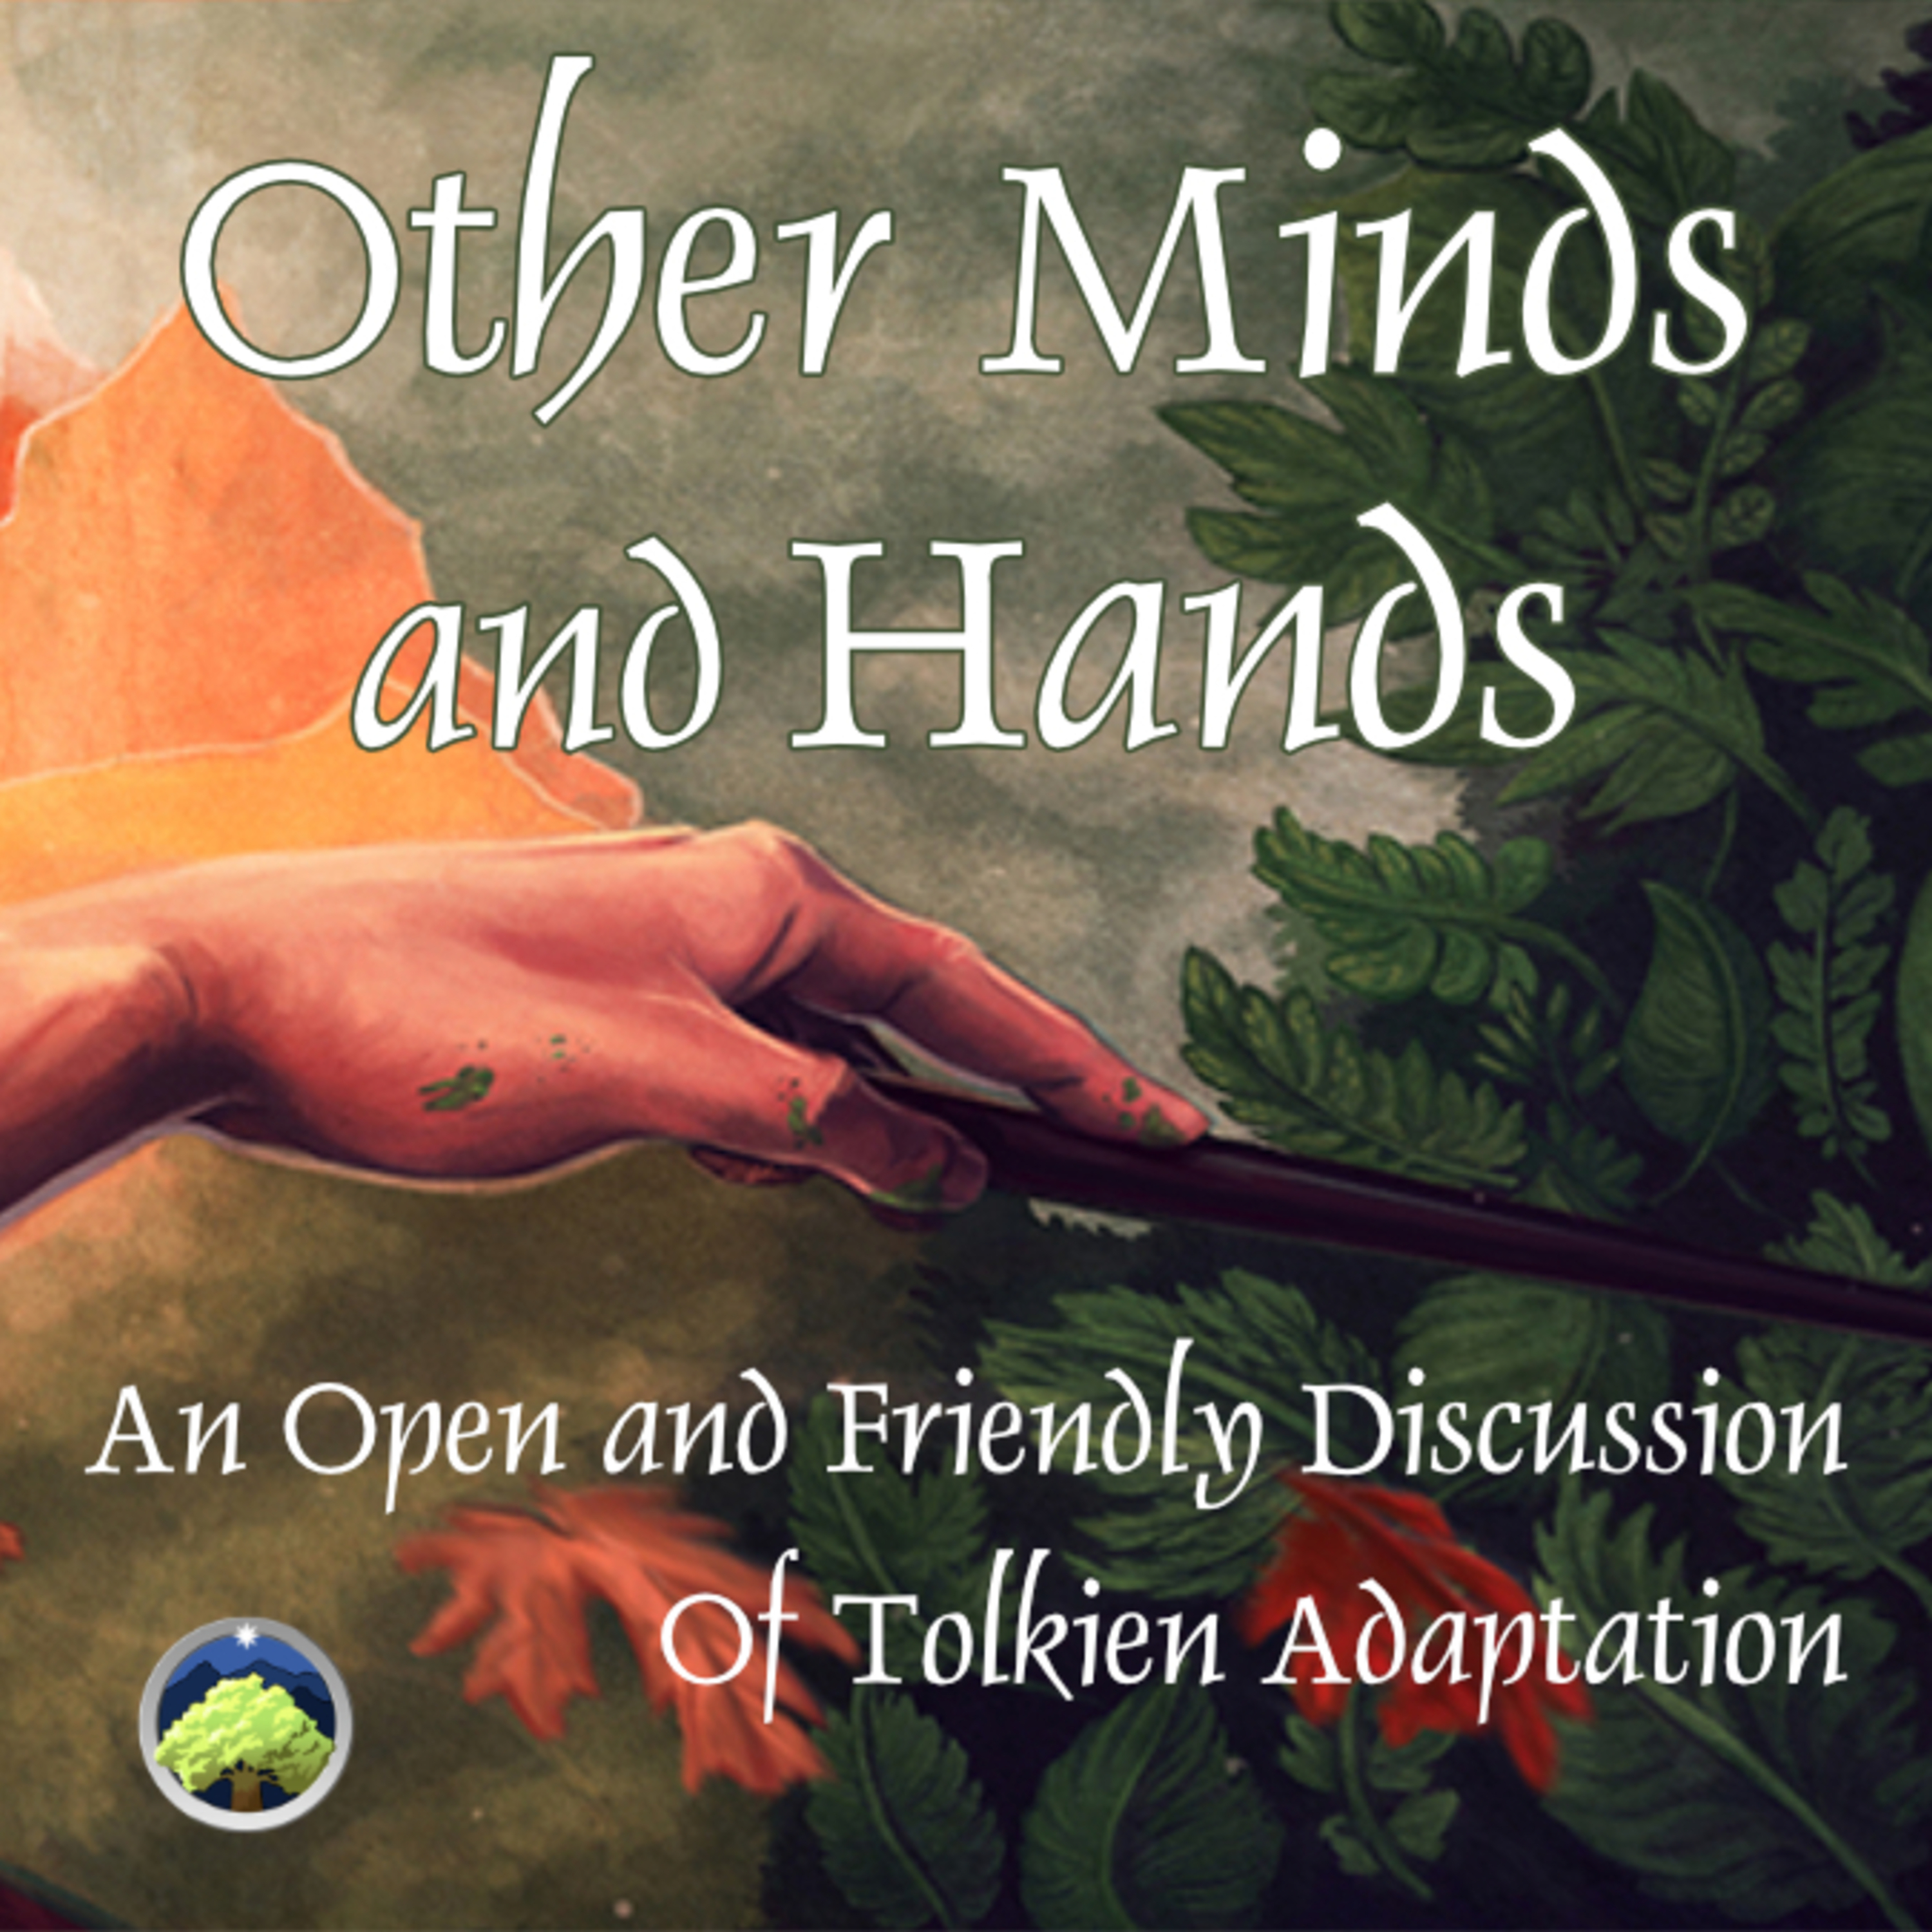 463: Other Minds and Hands, Episode 2